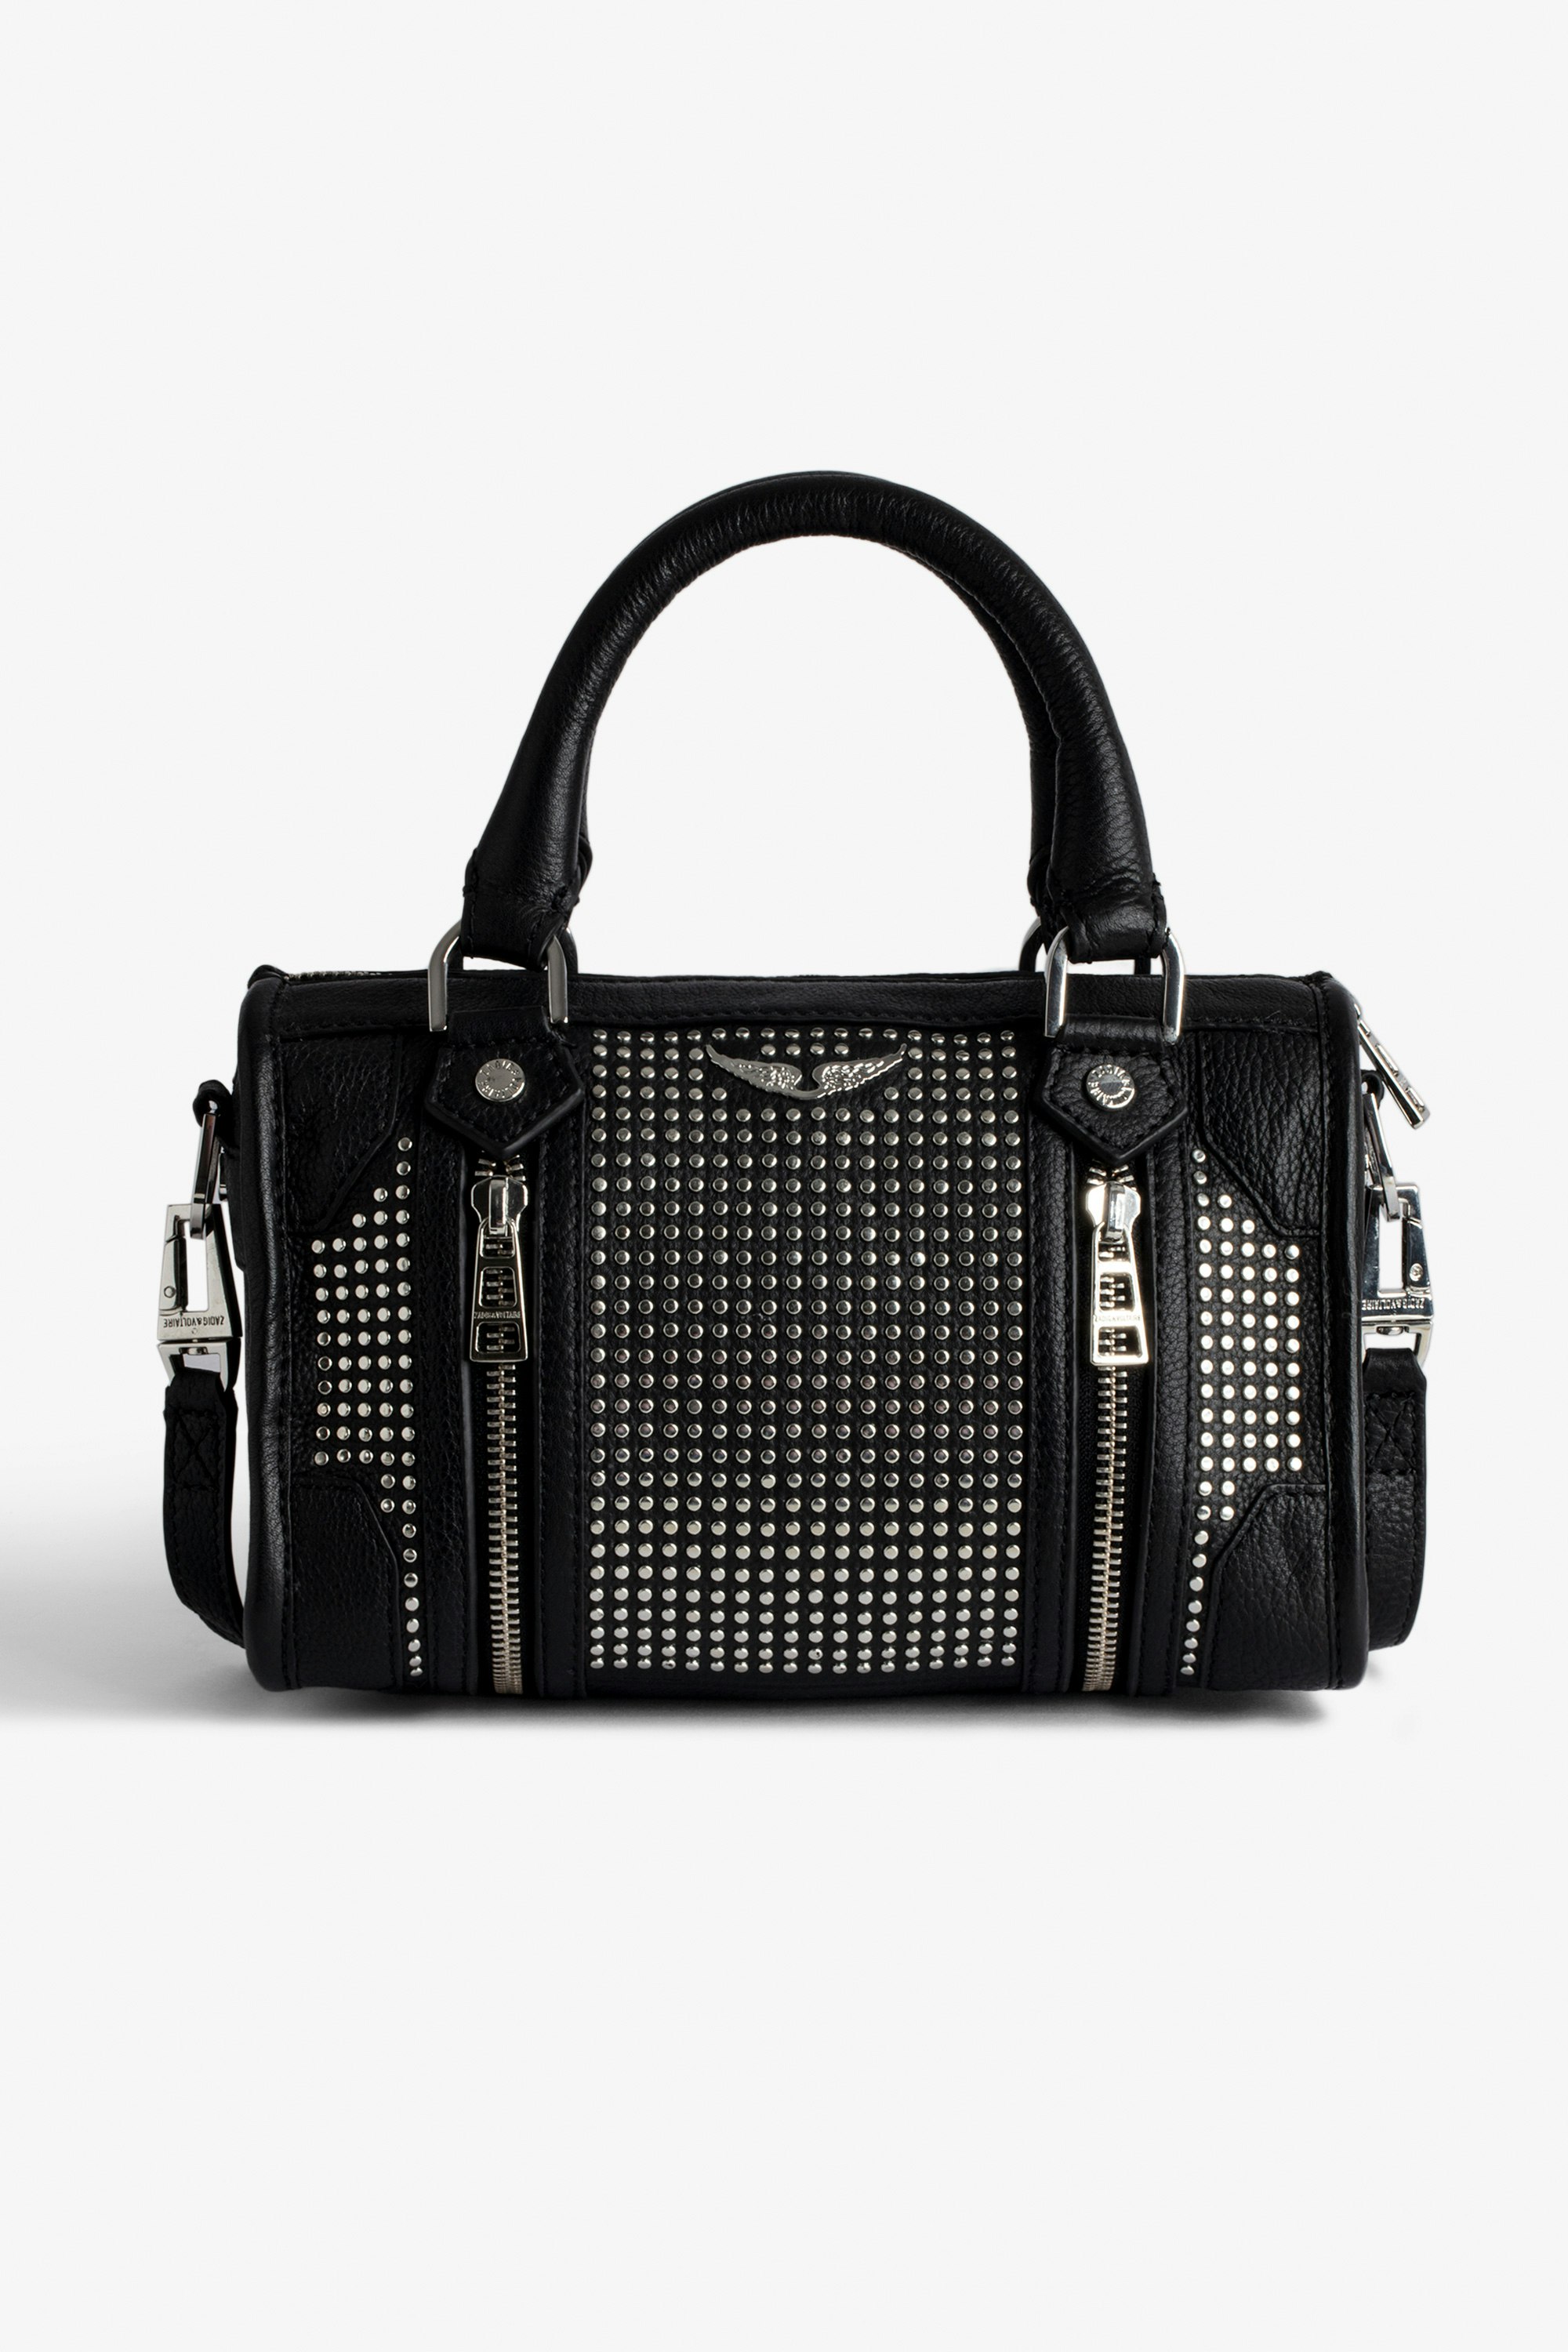 XS Sunny #2 バッグ Women’s small zipped bag in black leather with studs and a shoulder strap